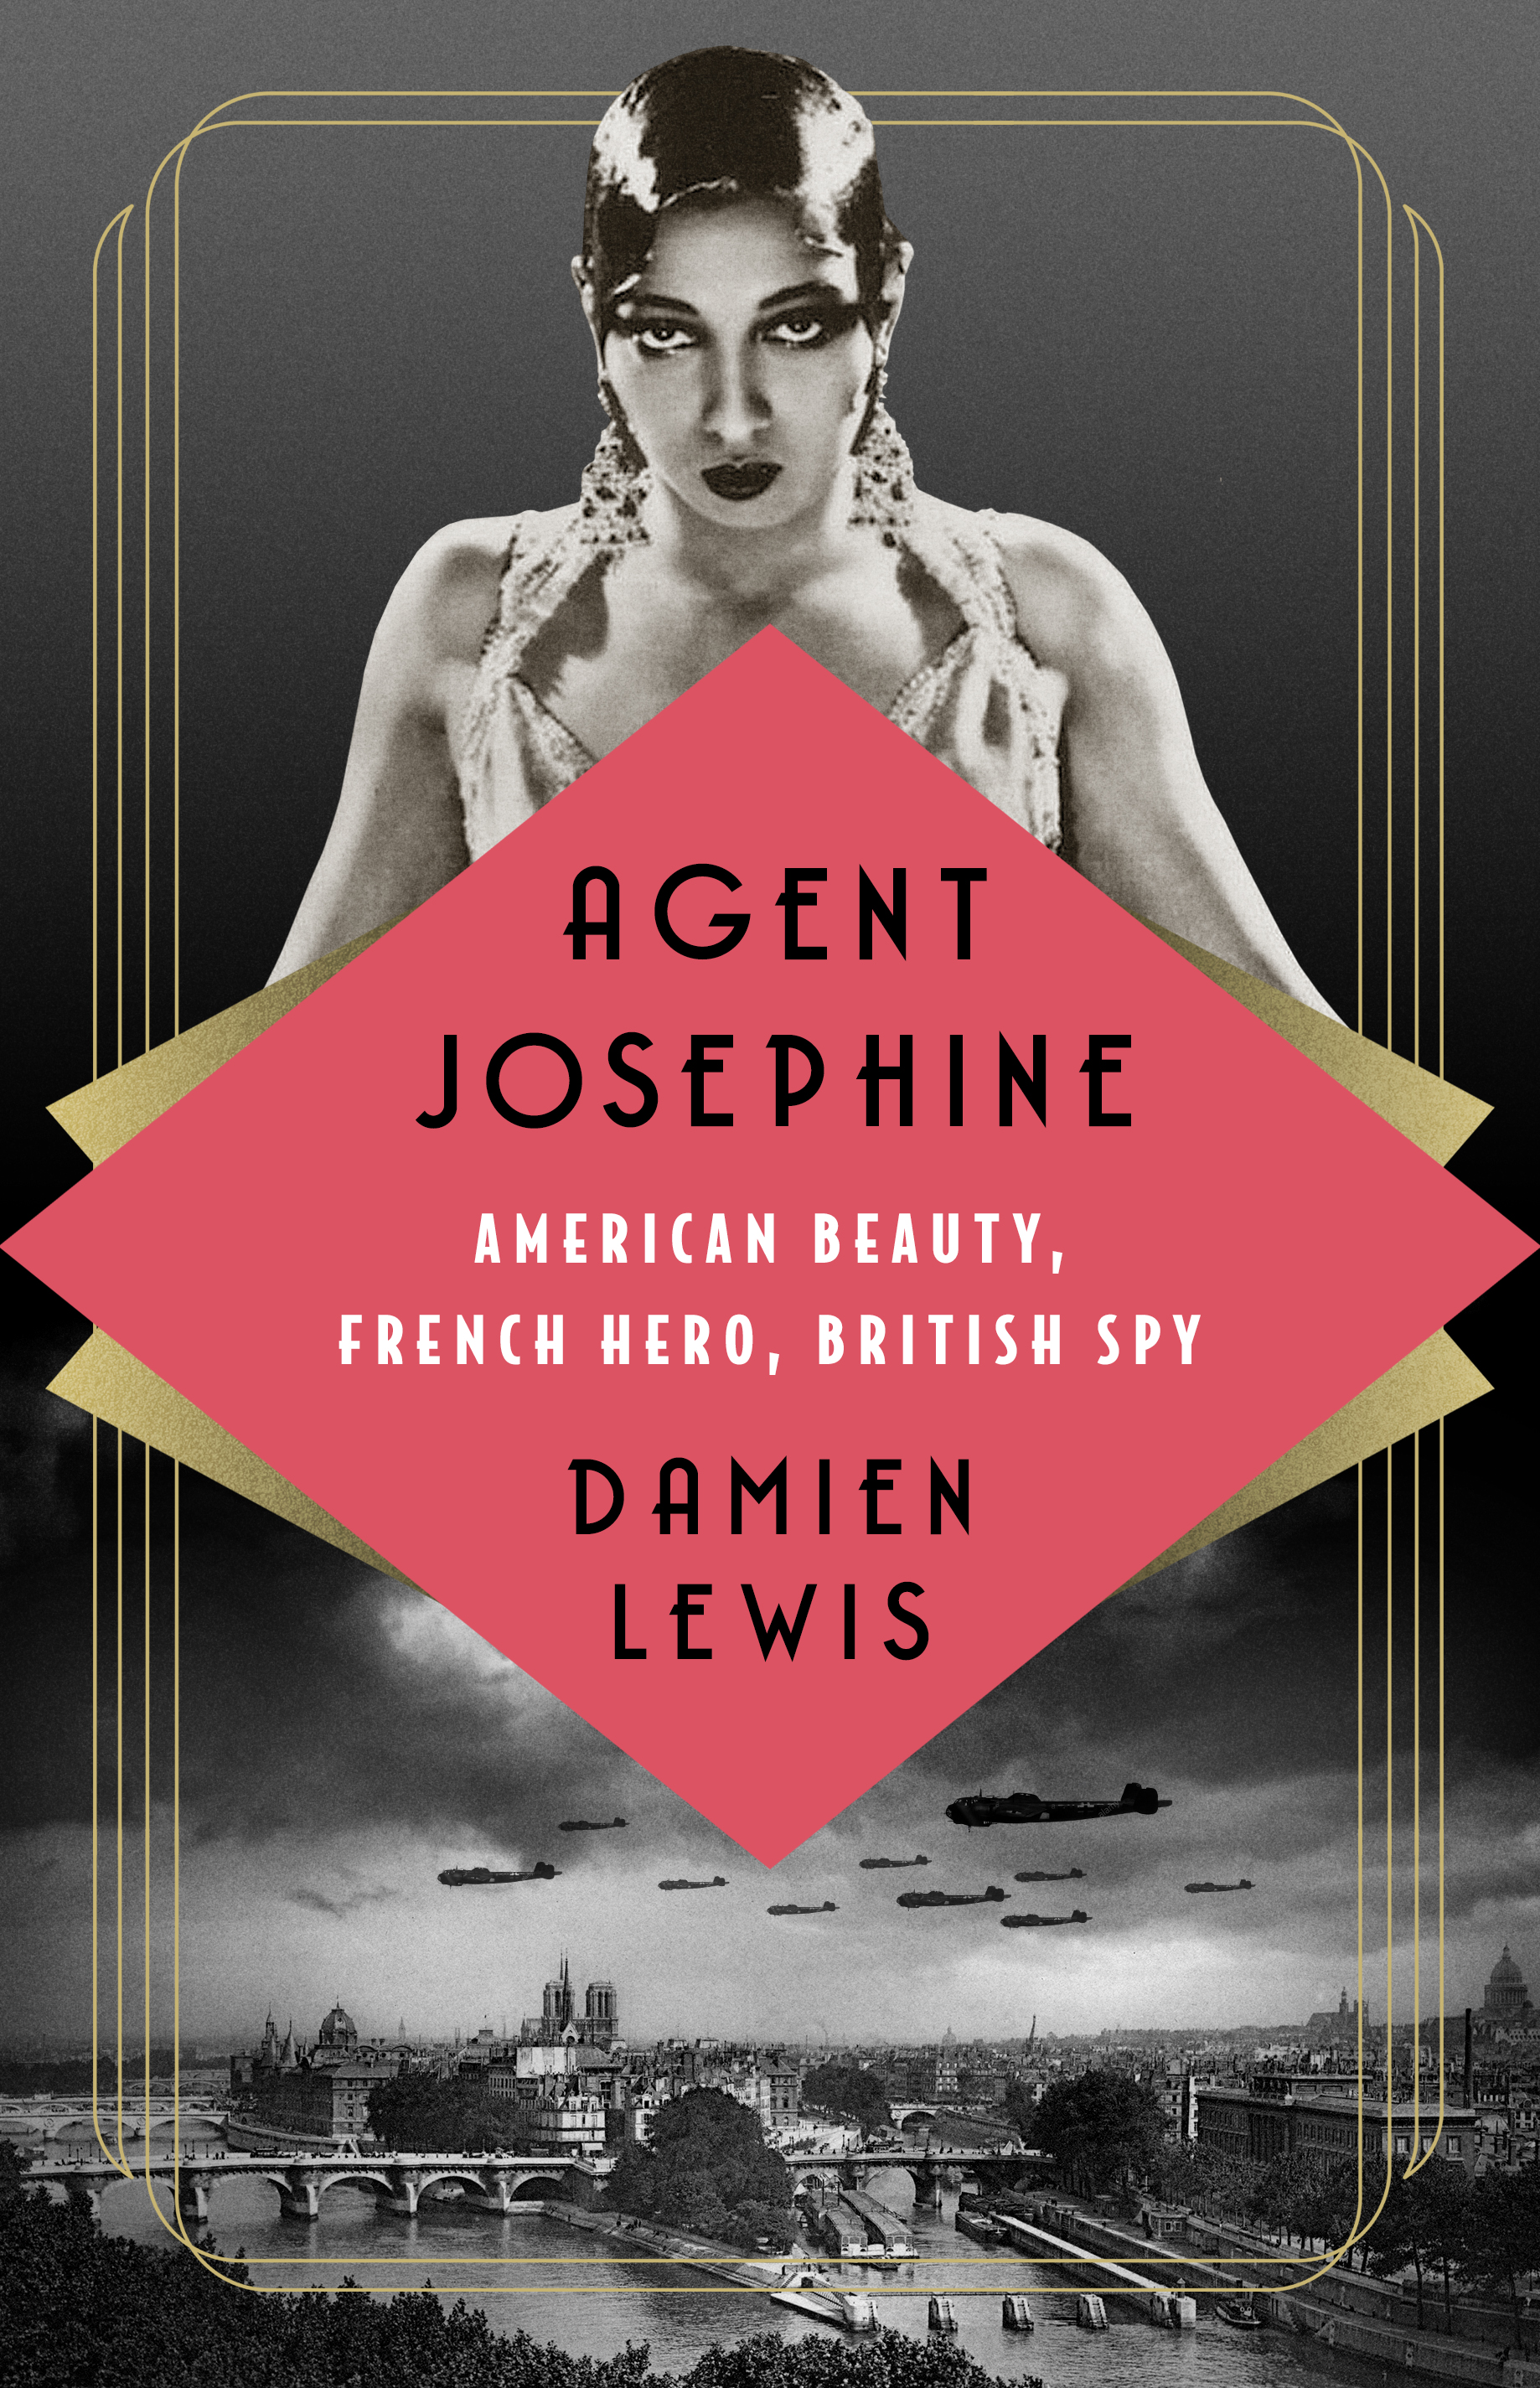 Agent　Josephine　by　Hachette　Damien　Lewis　Book　Group